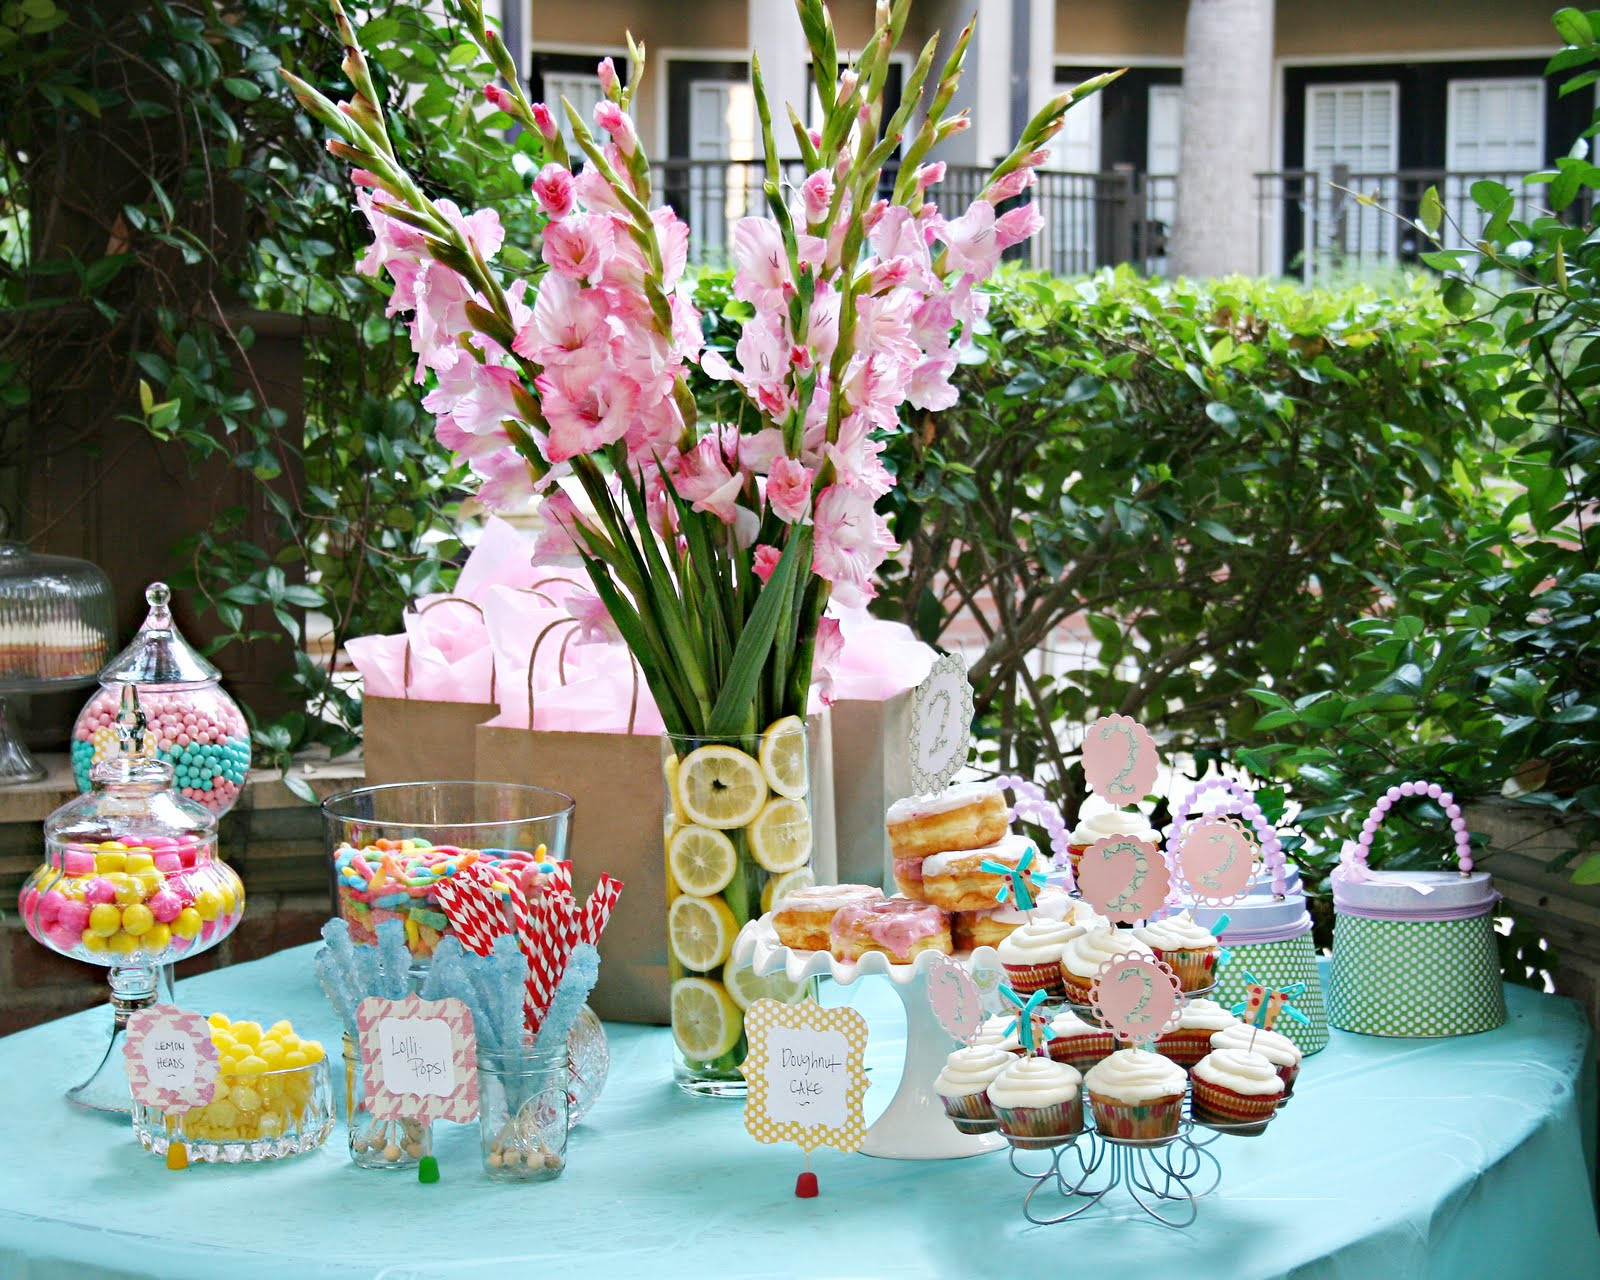 Sweet 16 Pool Party Ideas
 Cook Bake & Decorate Girly Pool Party